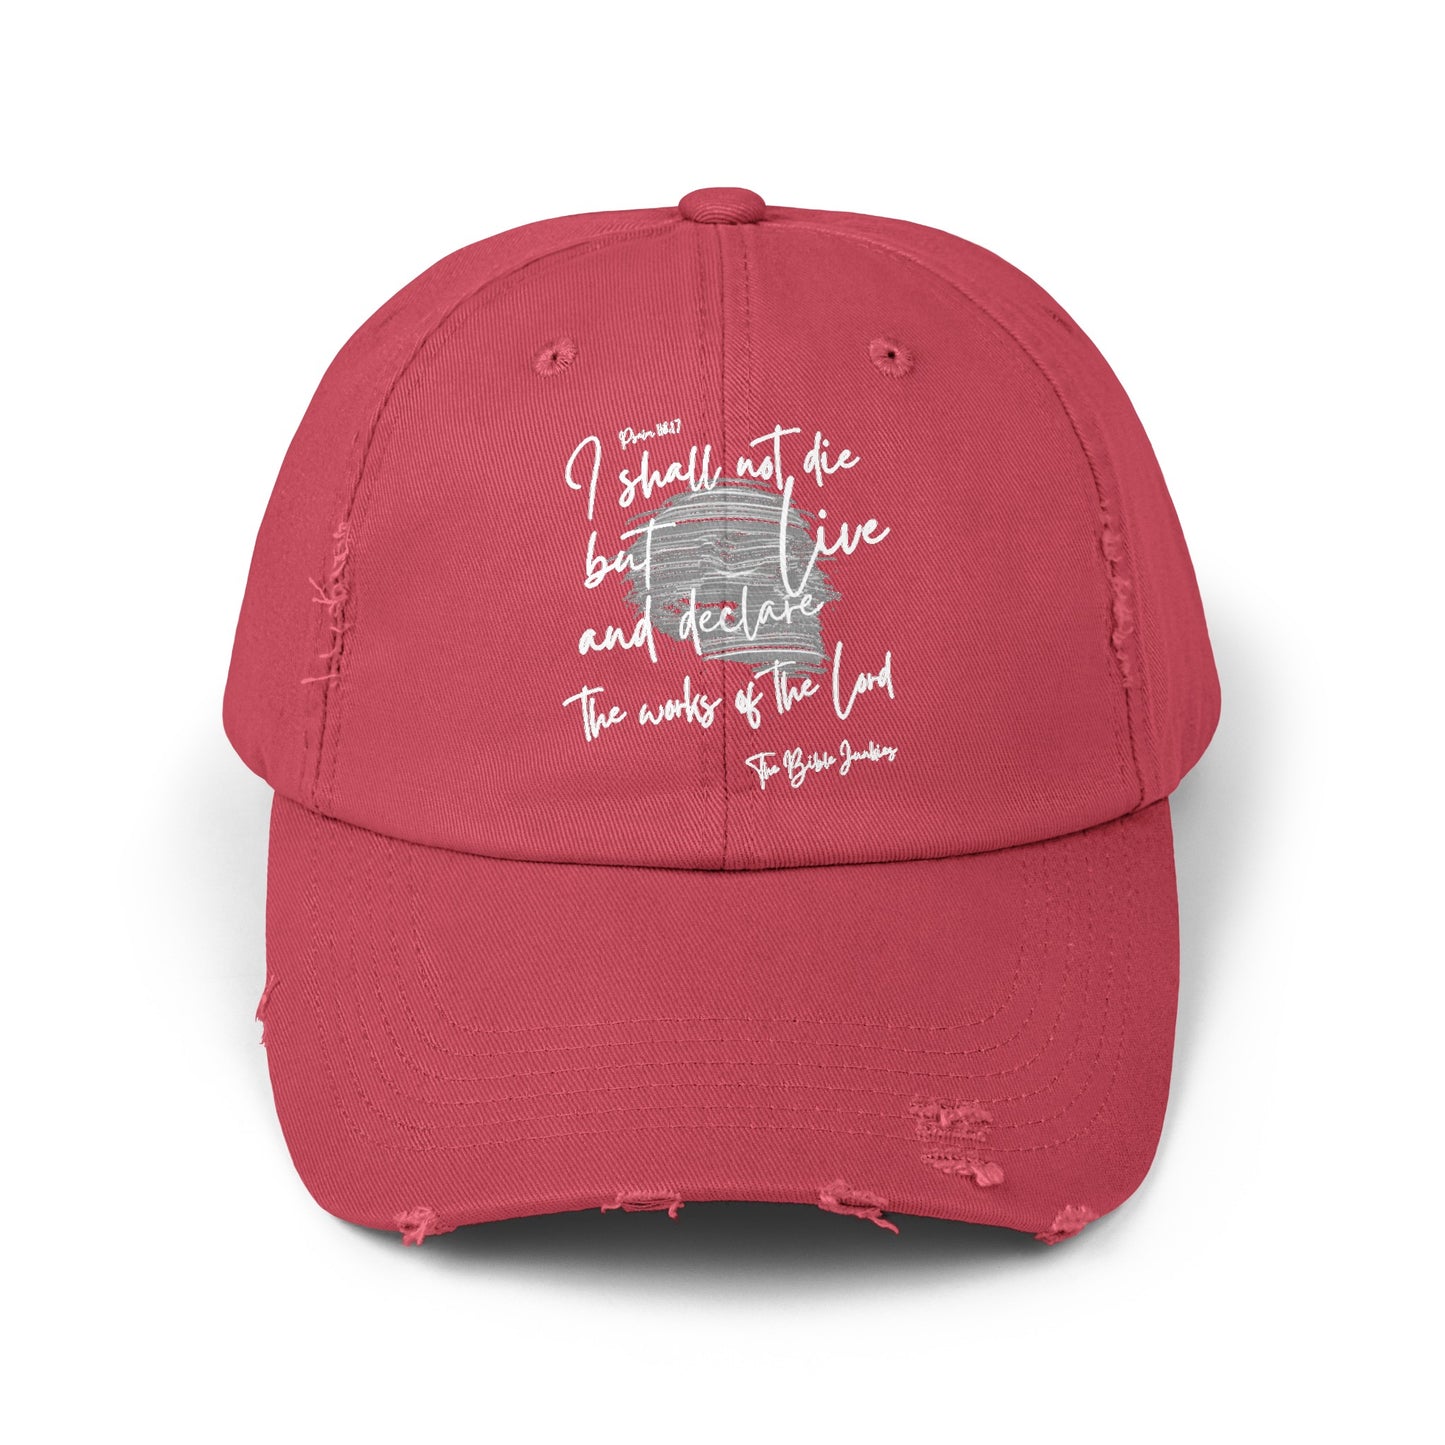 I Shall Live, Unisex Distressed Cap - The Bible Junkies®